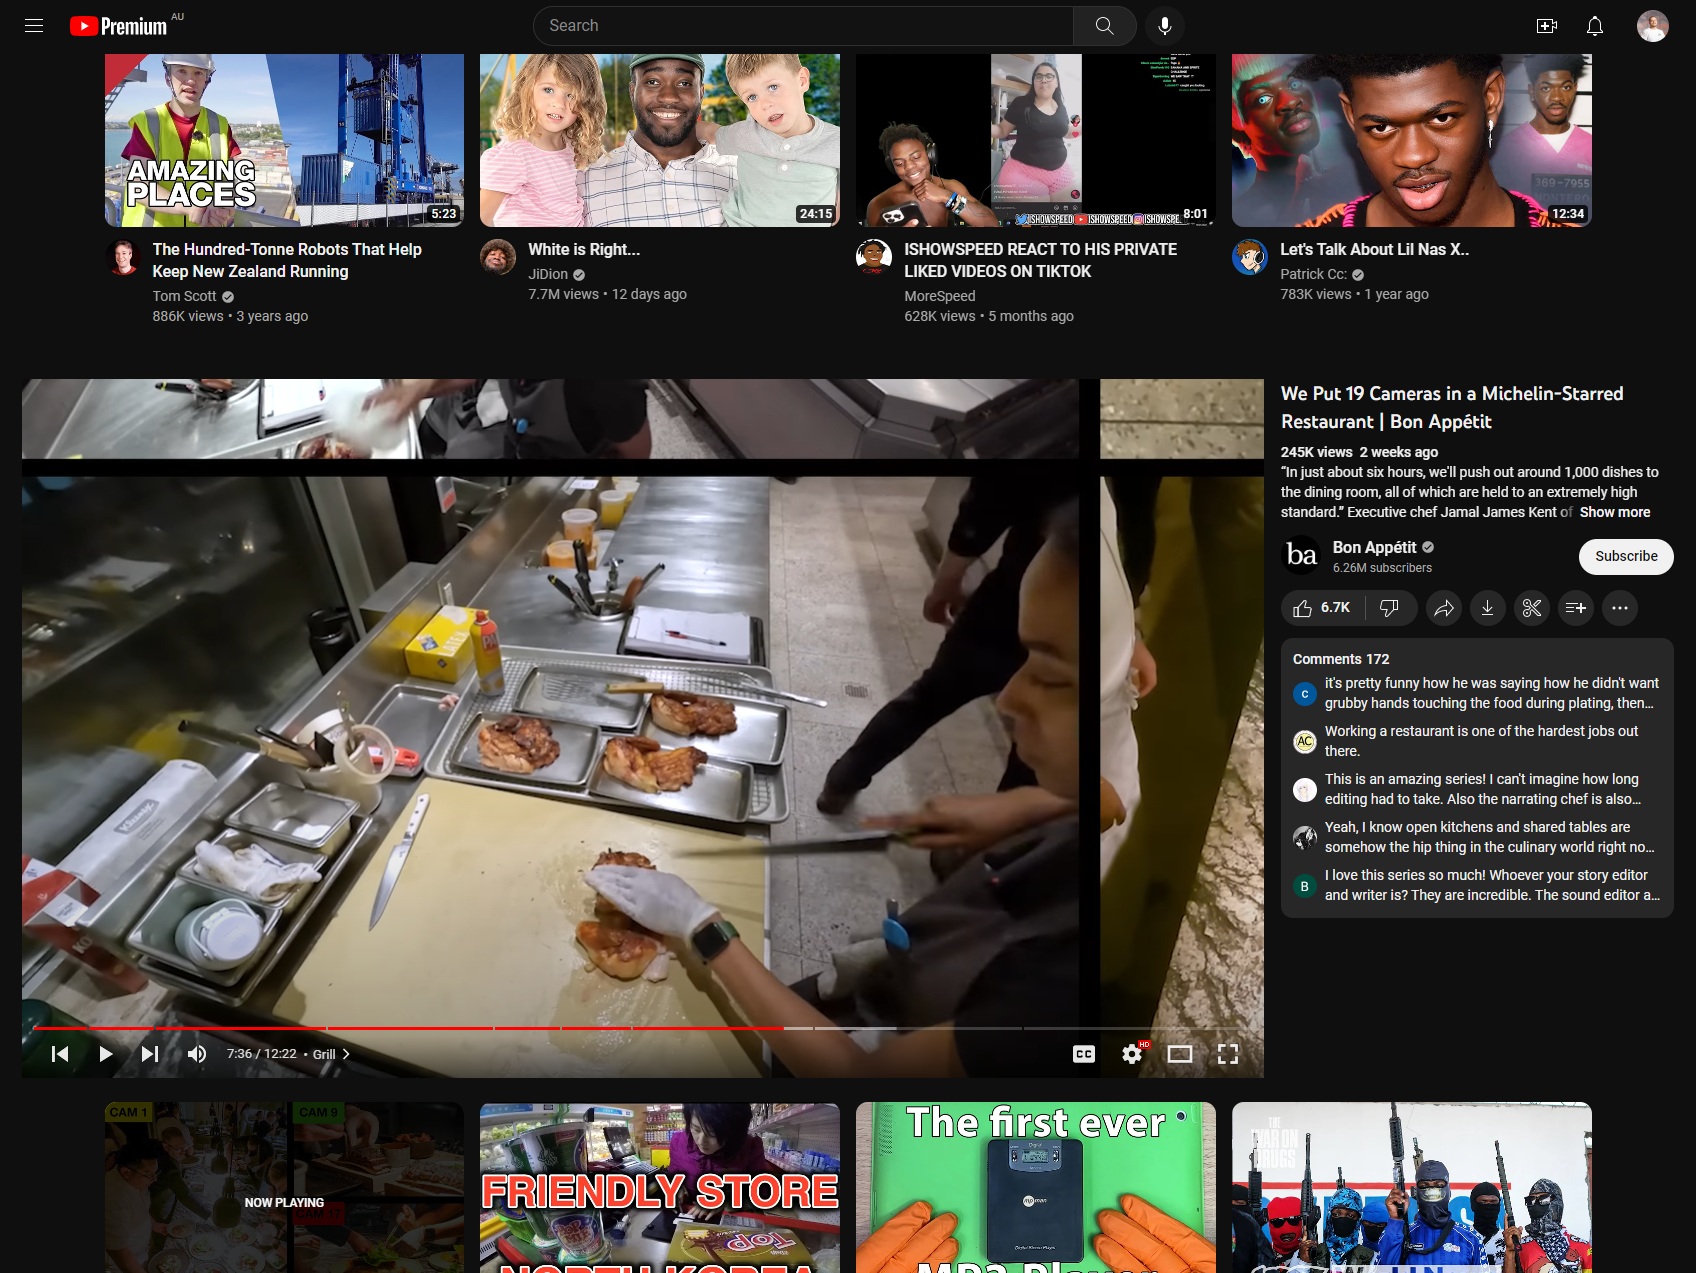 YouTube is testing another new video page layout in 2023